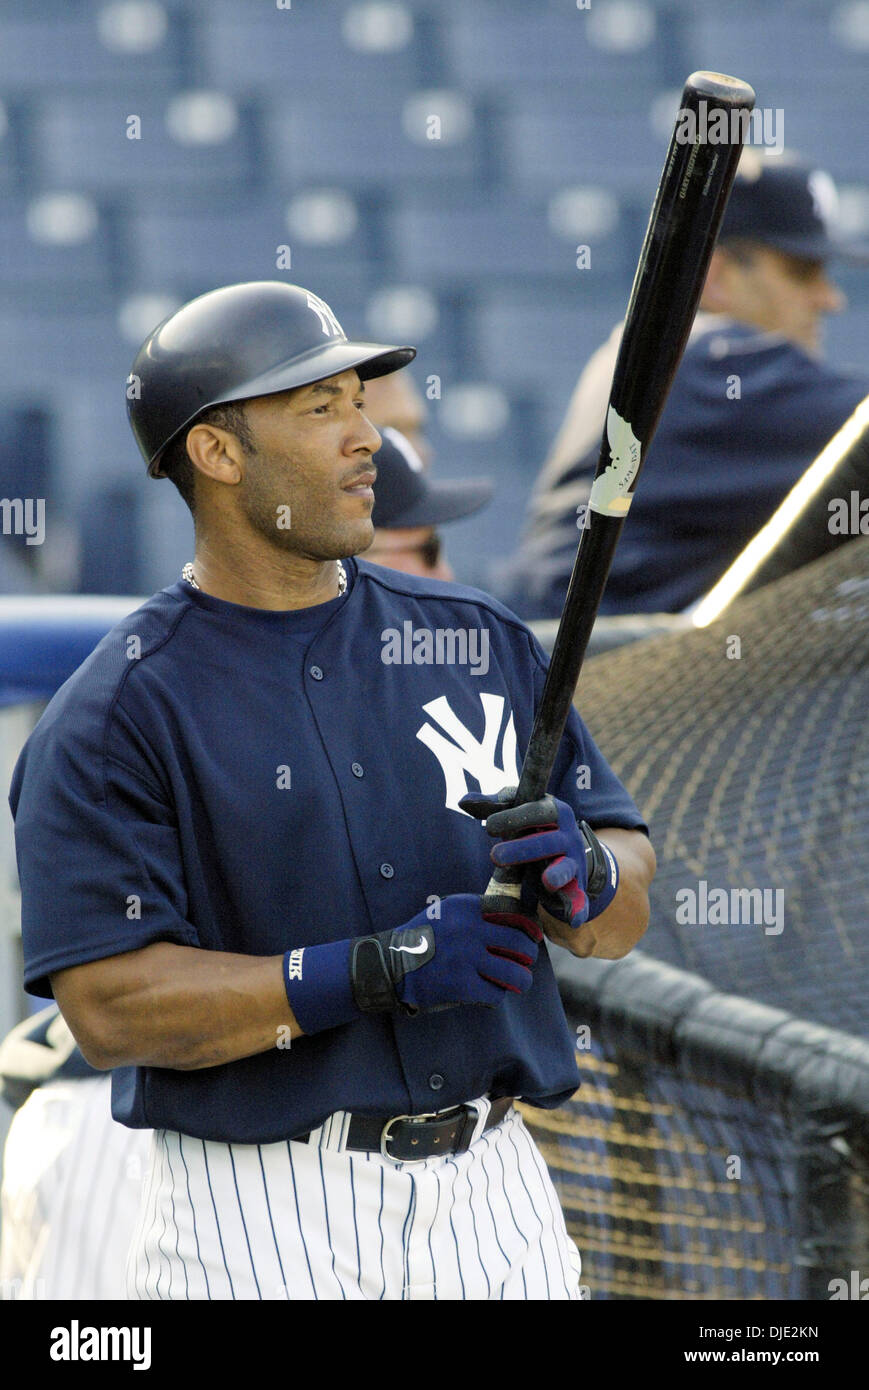 March 12, 2004; Tampa, FL, USA; New York Yankees outfielder GARY SHEFFIELD  takes batting practice before the spring training game with the Houston  Astros at Legends Field in Tampa, FL, Friday, March